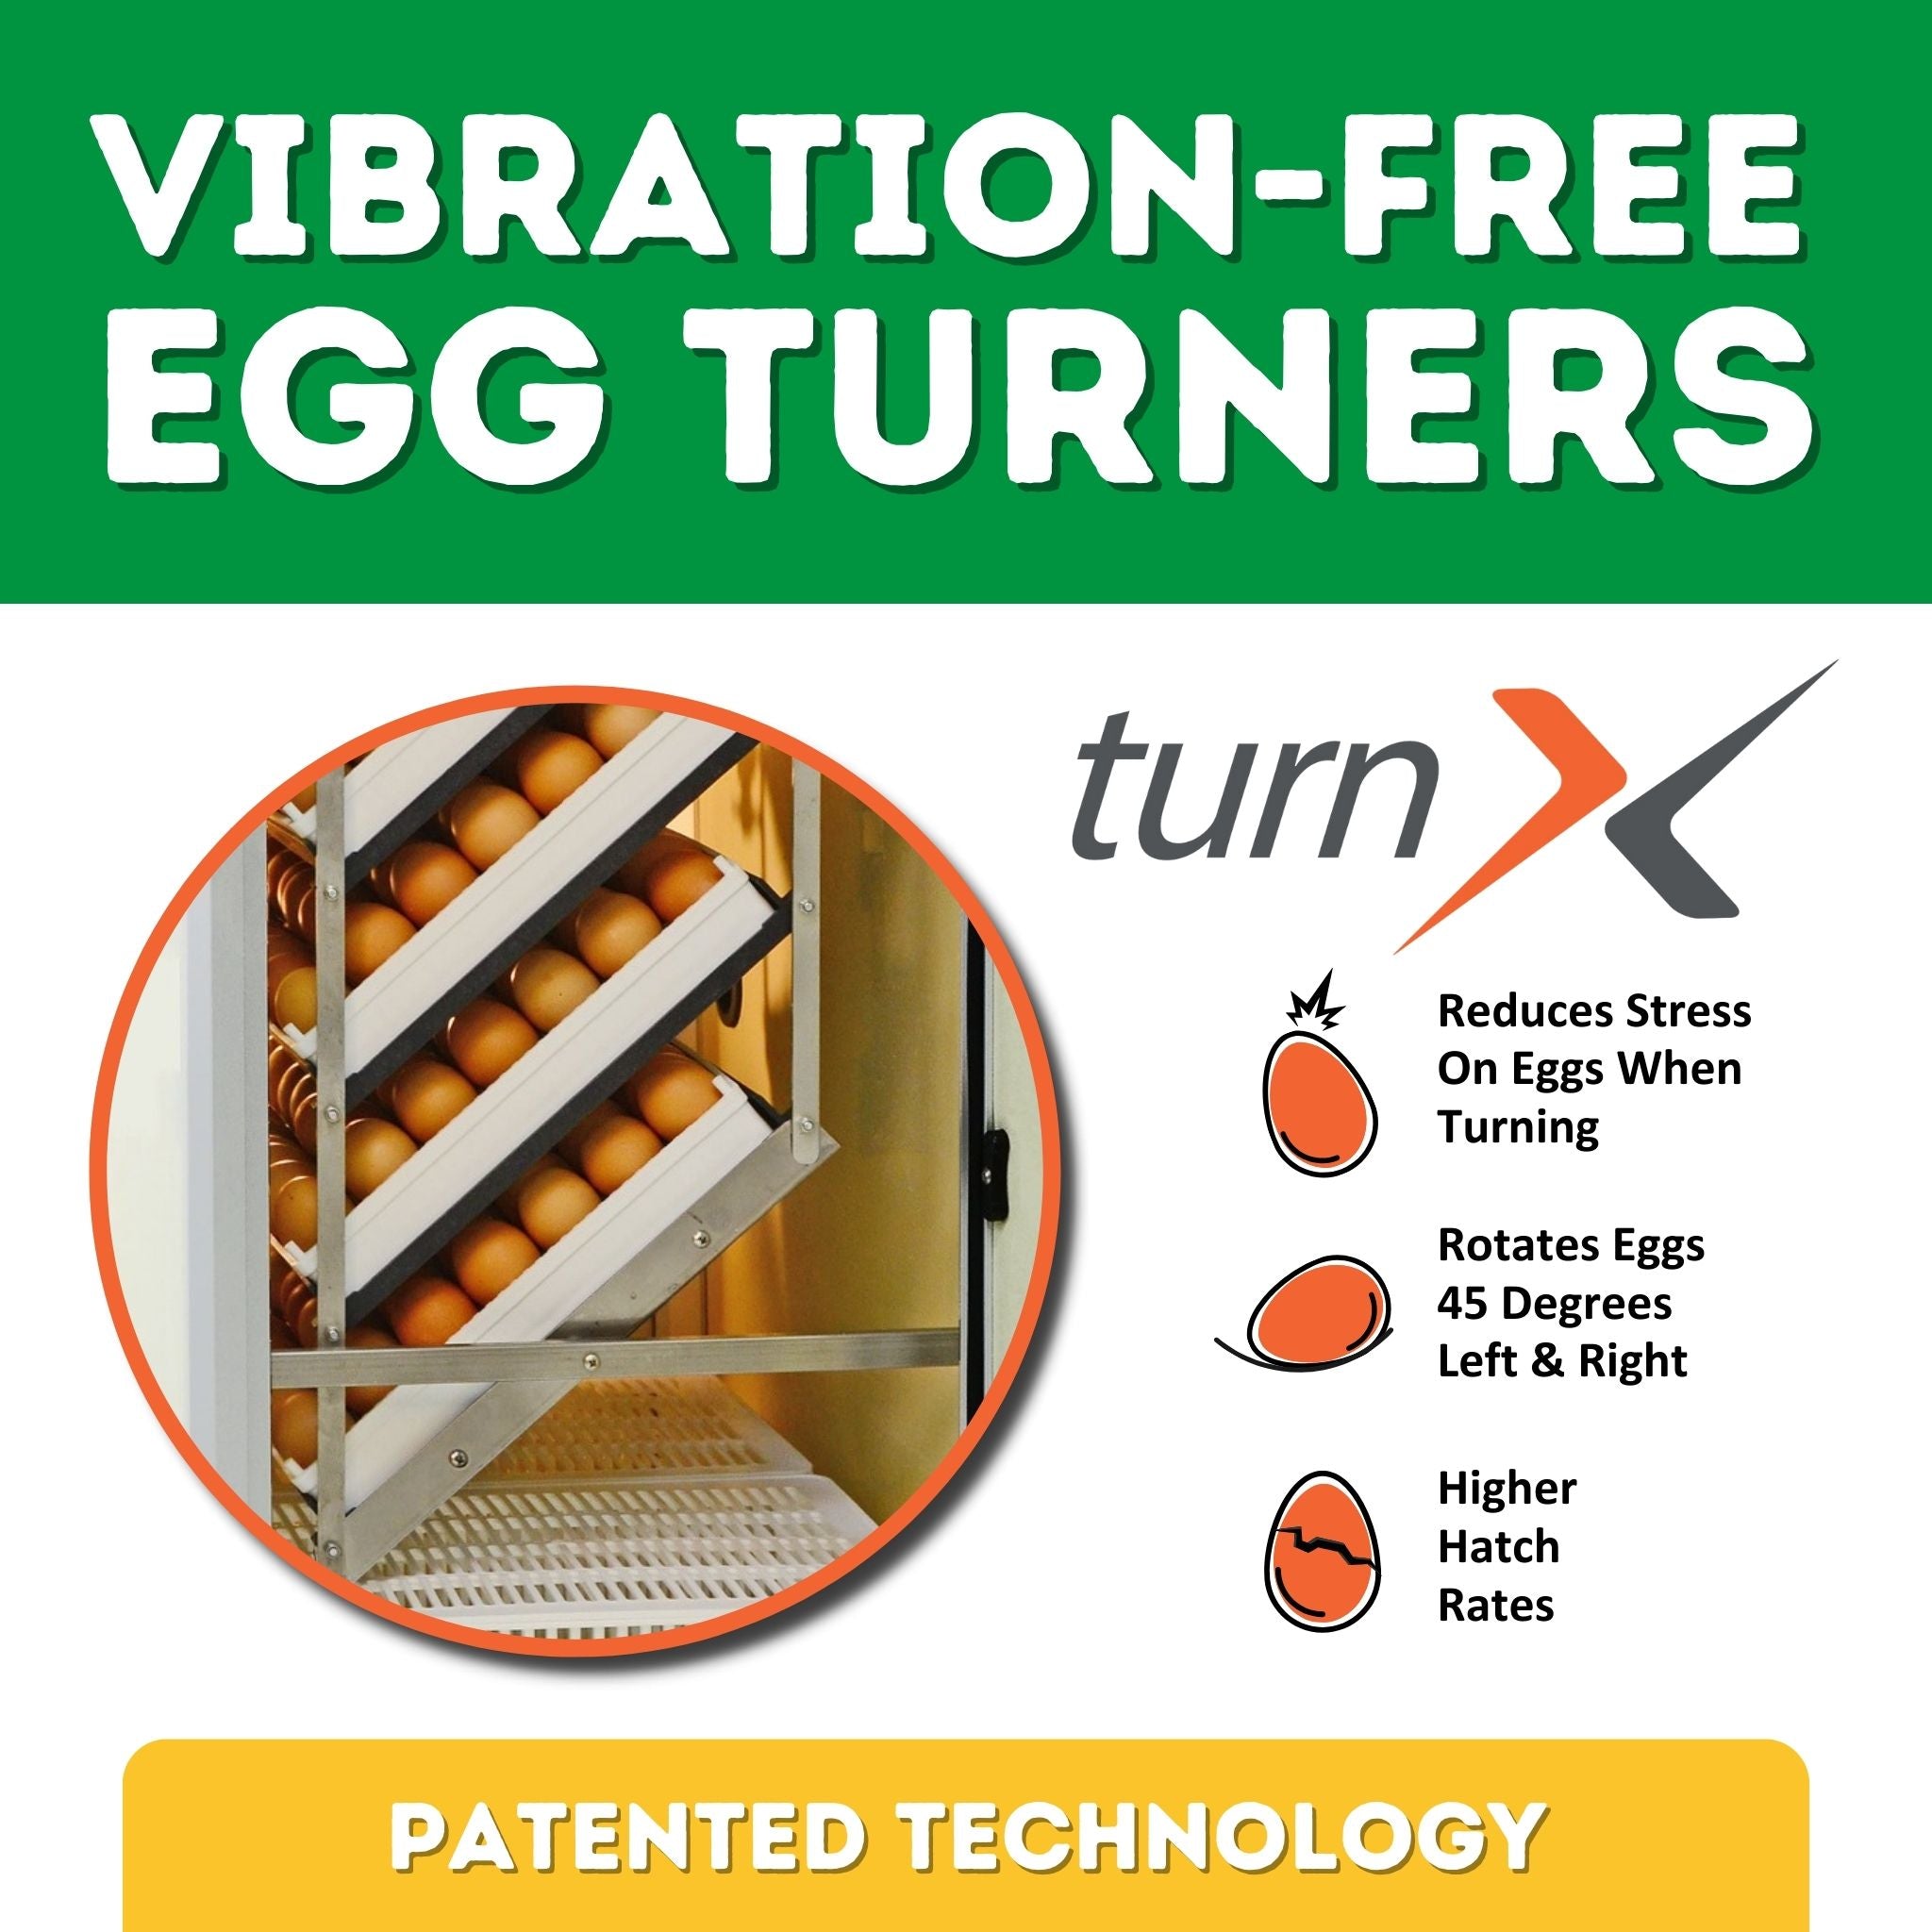 Hatching Time Cimuka. Image shows TurnX vibration-free egg turners. Patented technology infographic shows less stress on eggs, rotation of 45 degrees and higher hatch rates.